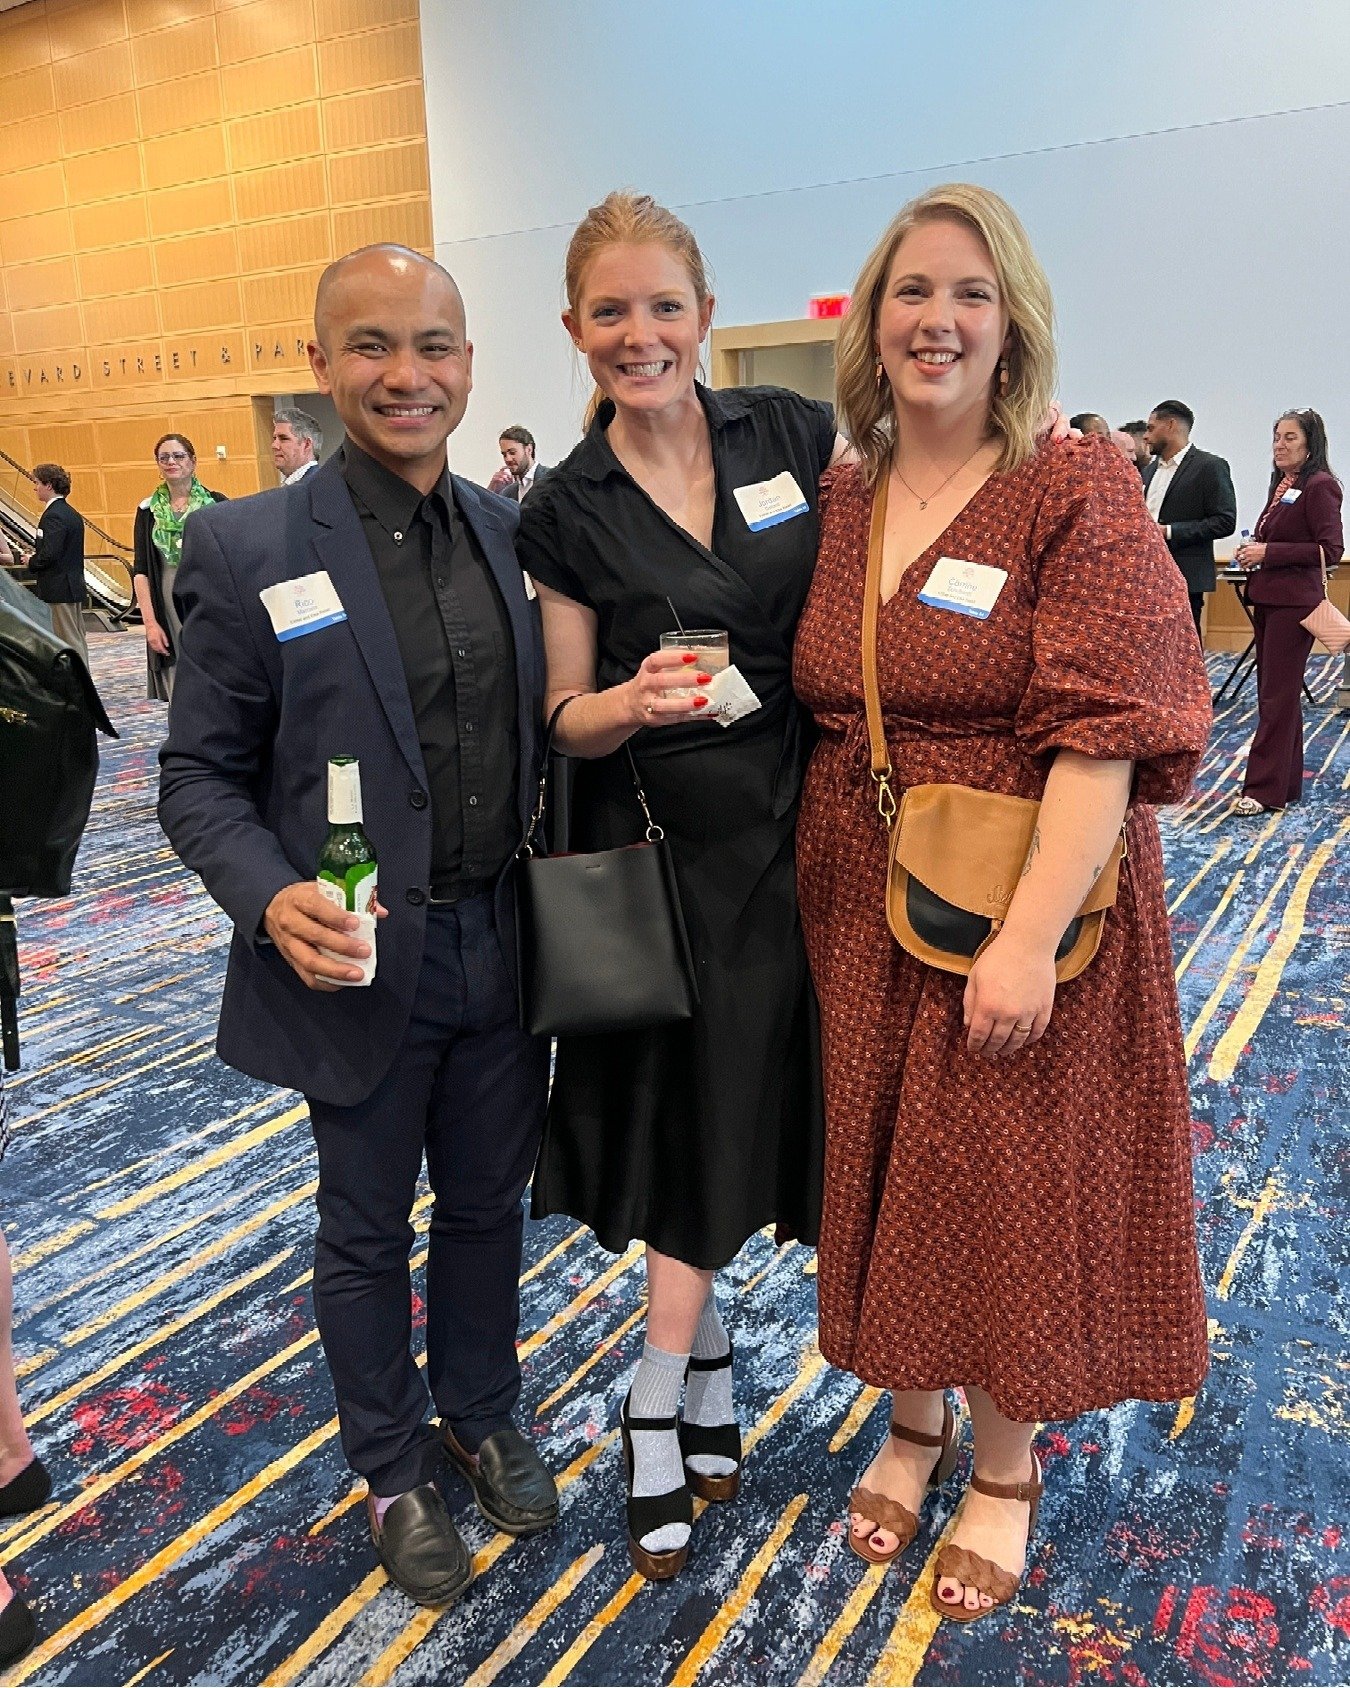 A few of us attended the CCCP Vision Awards a couple weeks ago. We left feeling inspired by how much work has been poured into the Queen City to make it a chart topping place to live. 🏙

If you ask us, our vibrant community of scrappy, bold, and cre